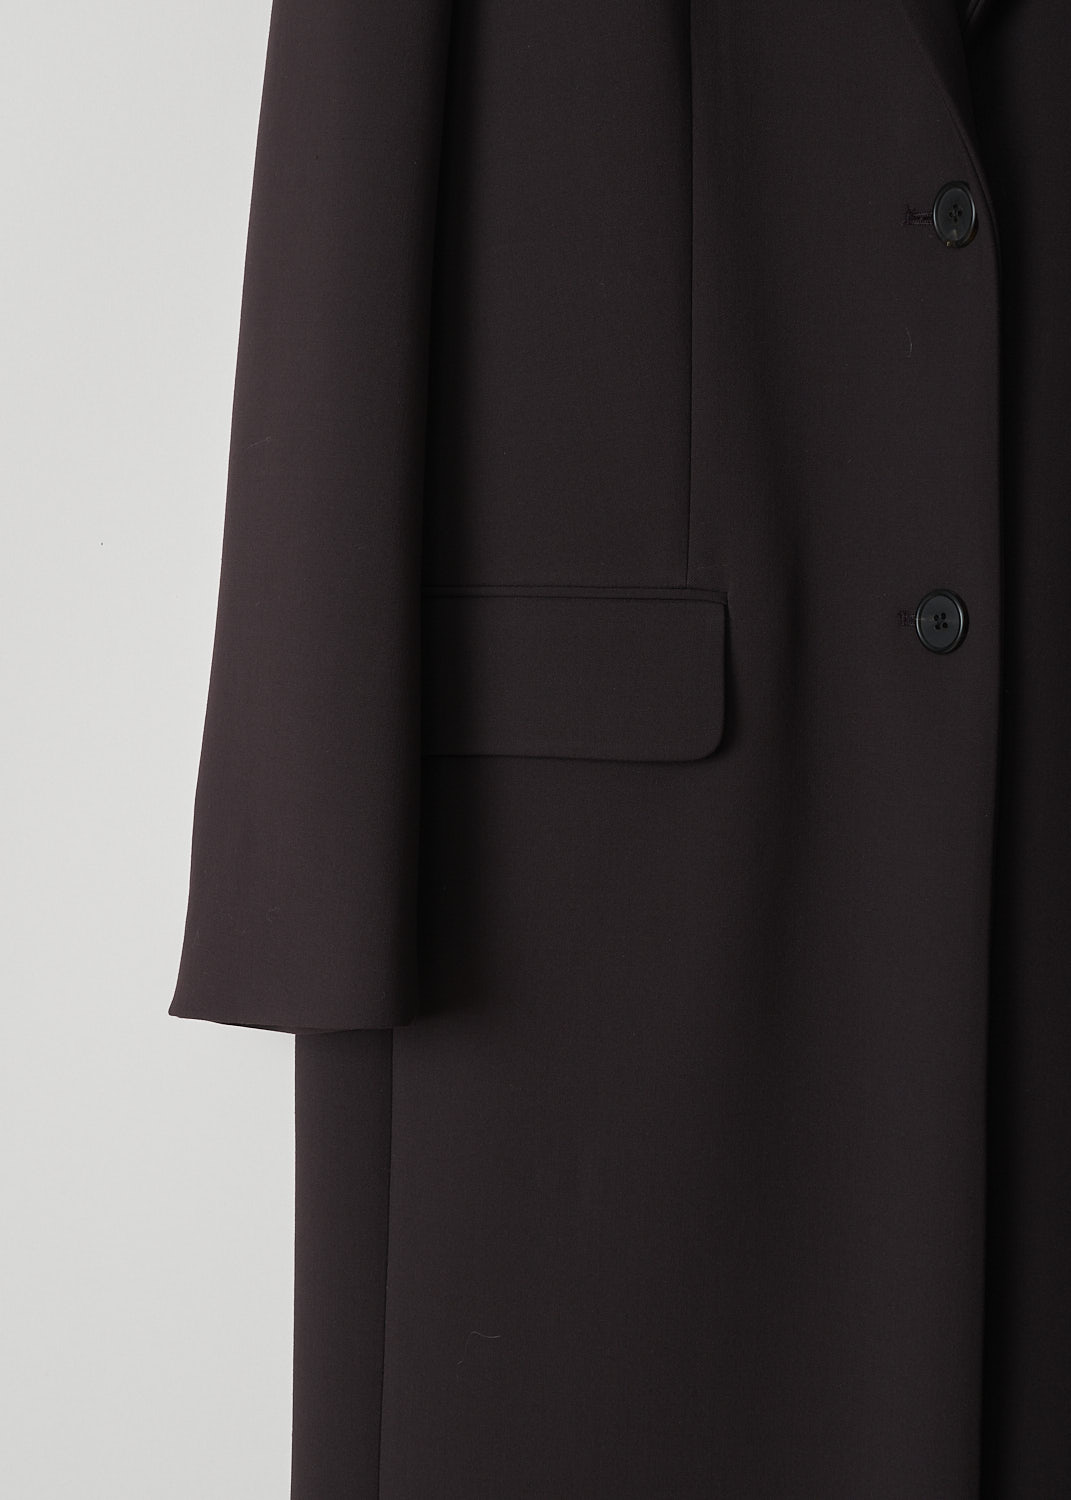 THE ROW, DUSTOVA COAT IN COFFEE, DUSTOVA_COAT_5869W21_18_COFFEE, Brown, Detail, This Coffee brown Dustova coat has a peaked lapel with a deep V and a front button closure. The long sleeves have buttoned cuffs. In the front, the coat has flap welt pockets. In the back, the coat has a single centre vent. 

